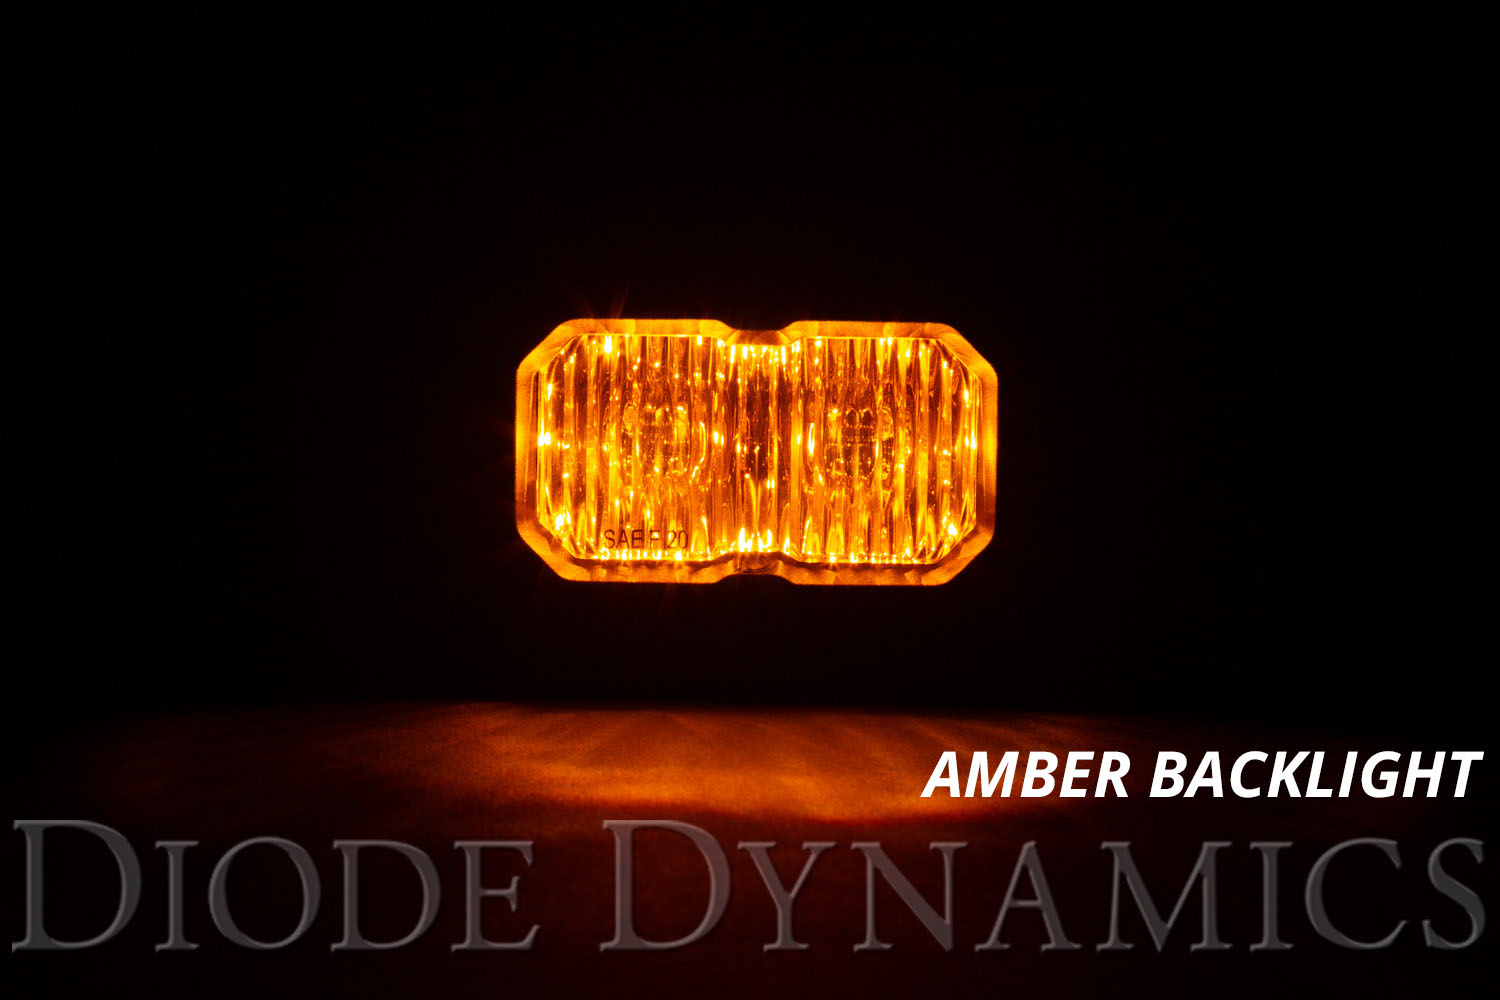 Diode Dynamics Stage Series 2 Inch LED Pod, Sport Yellow Flood Flush ABL Each - Click Image to Close